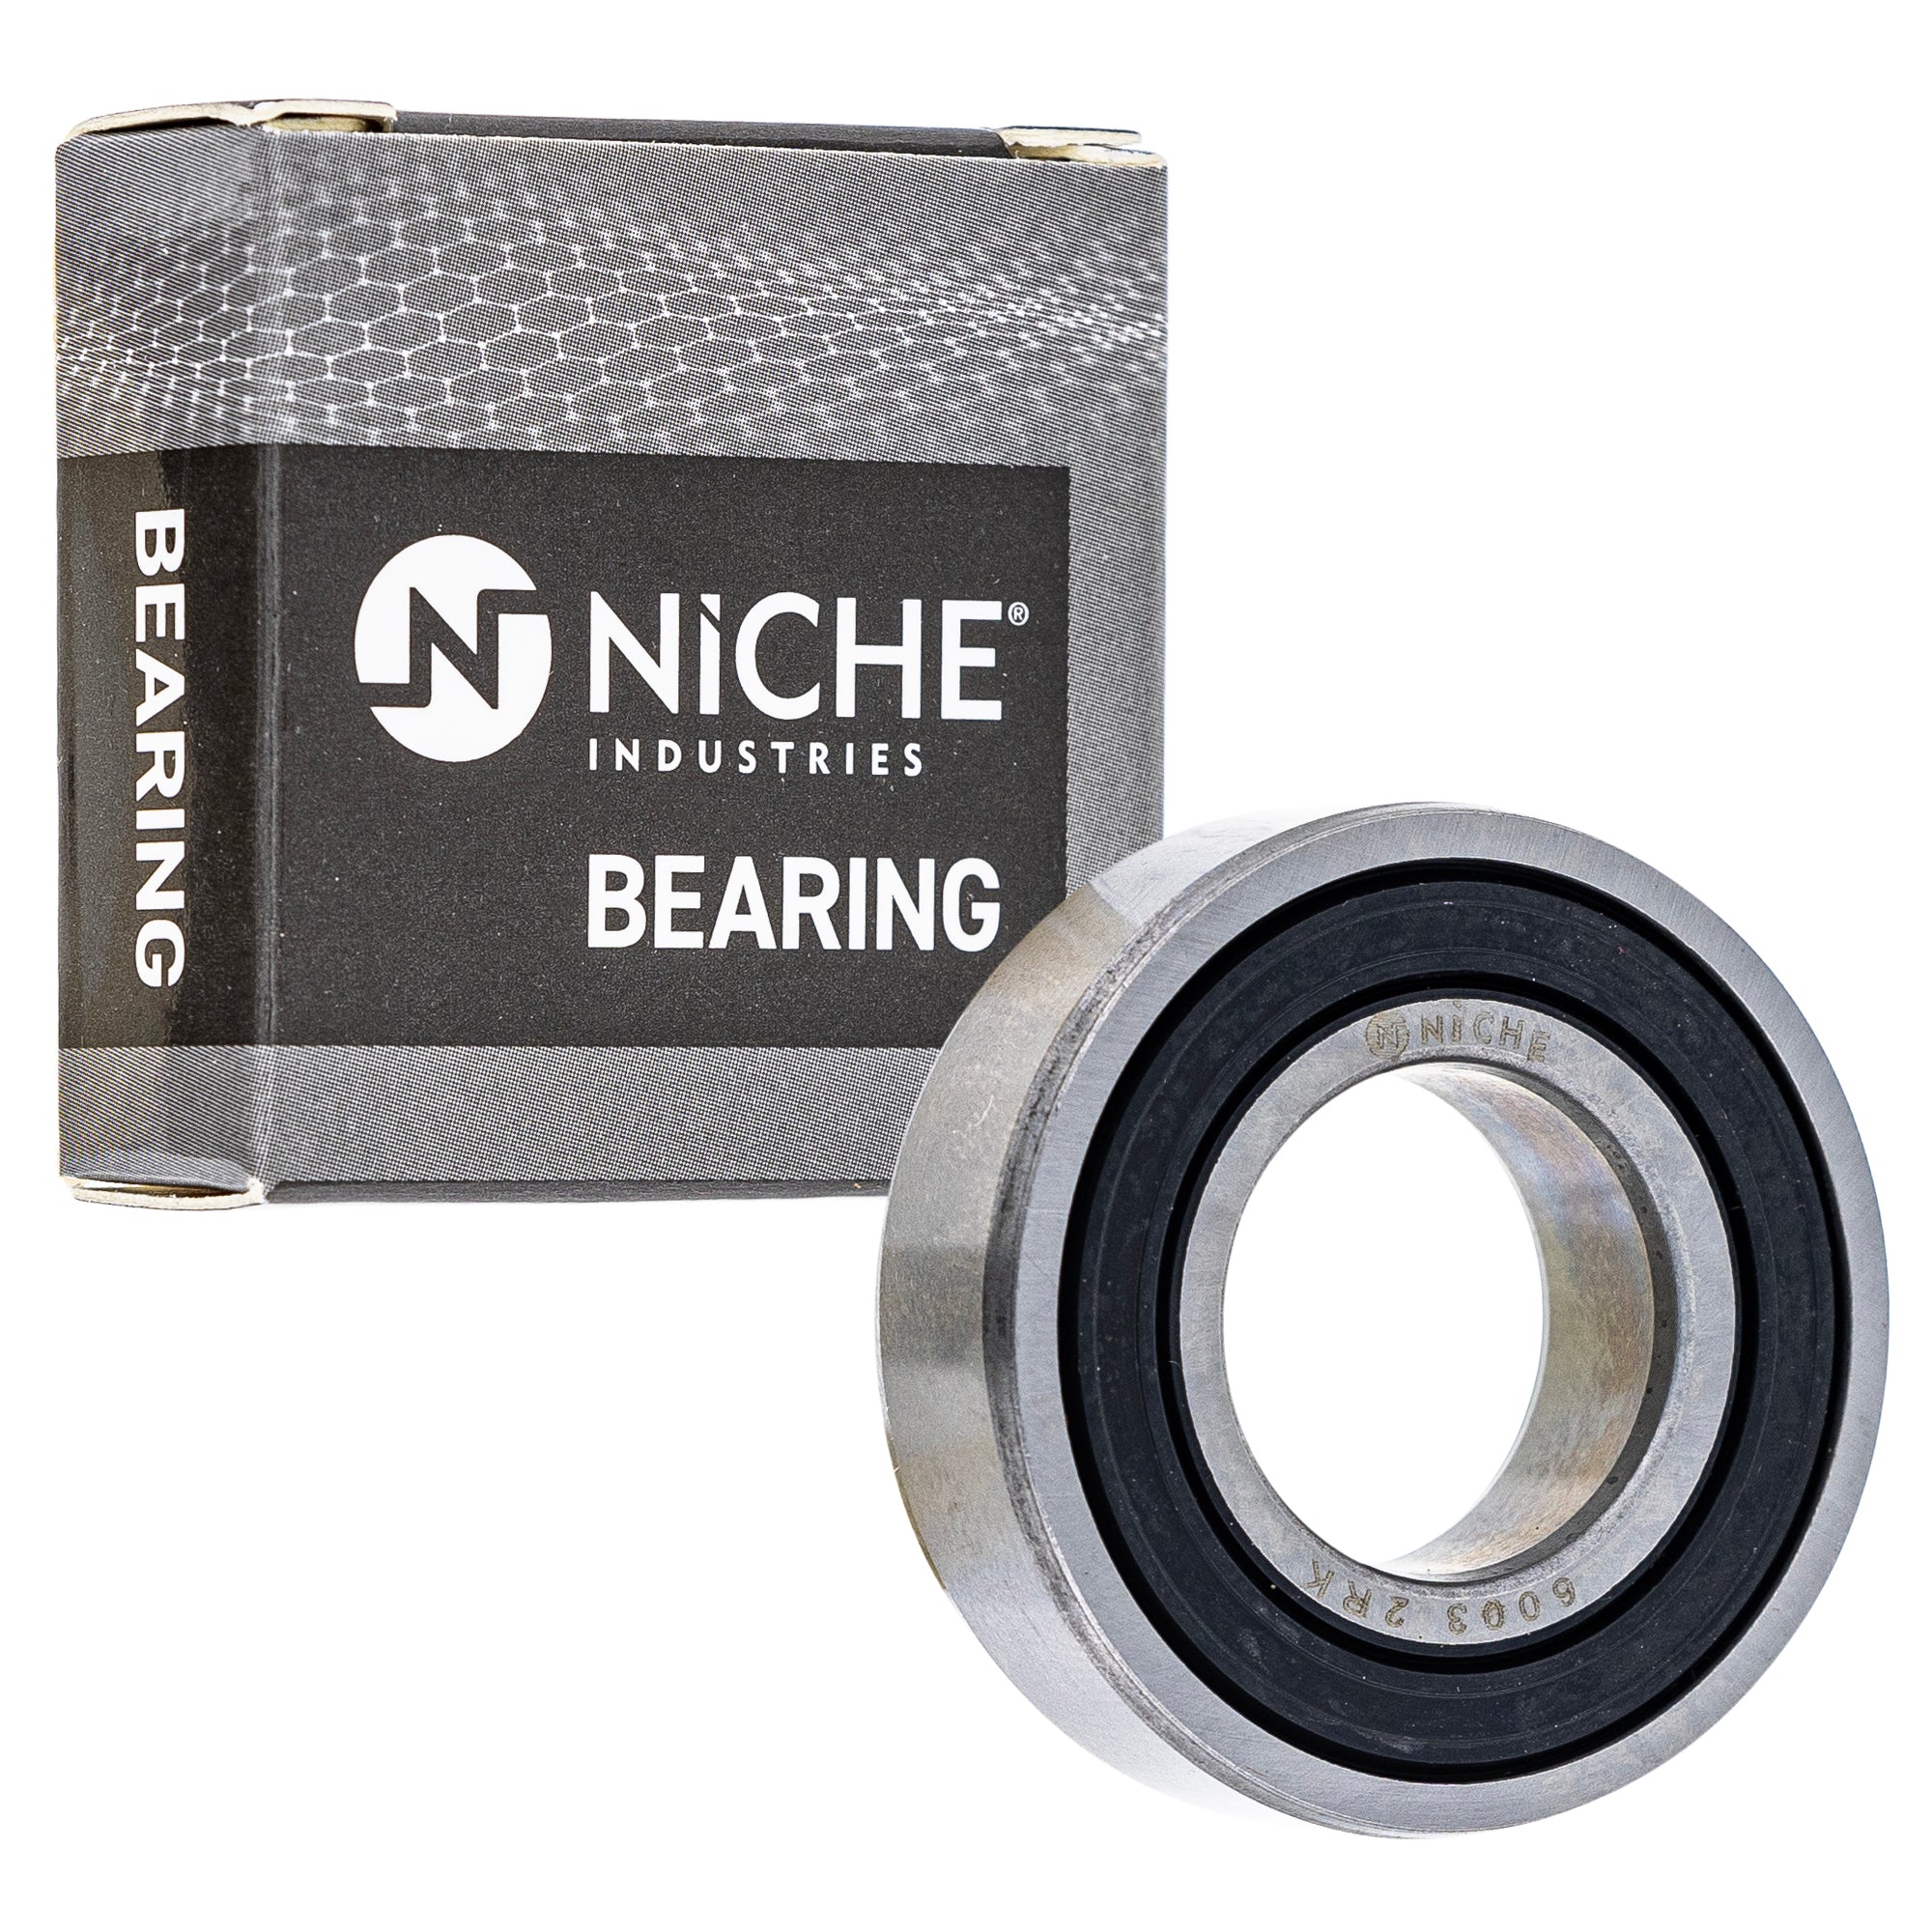 NICHE 519-CBB2325R Bearing 10-Pack for zOTHER Arctic Cat Textron